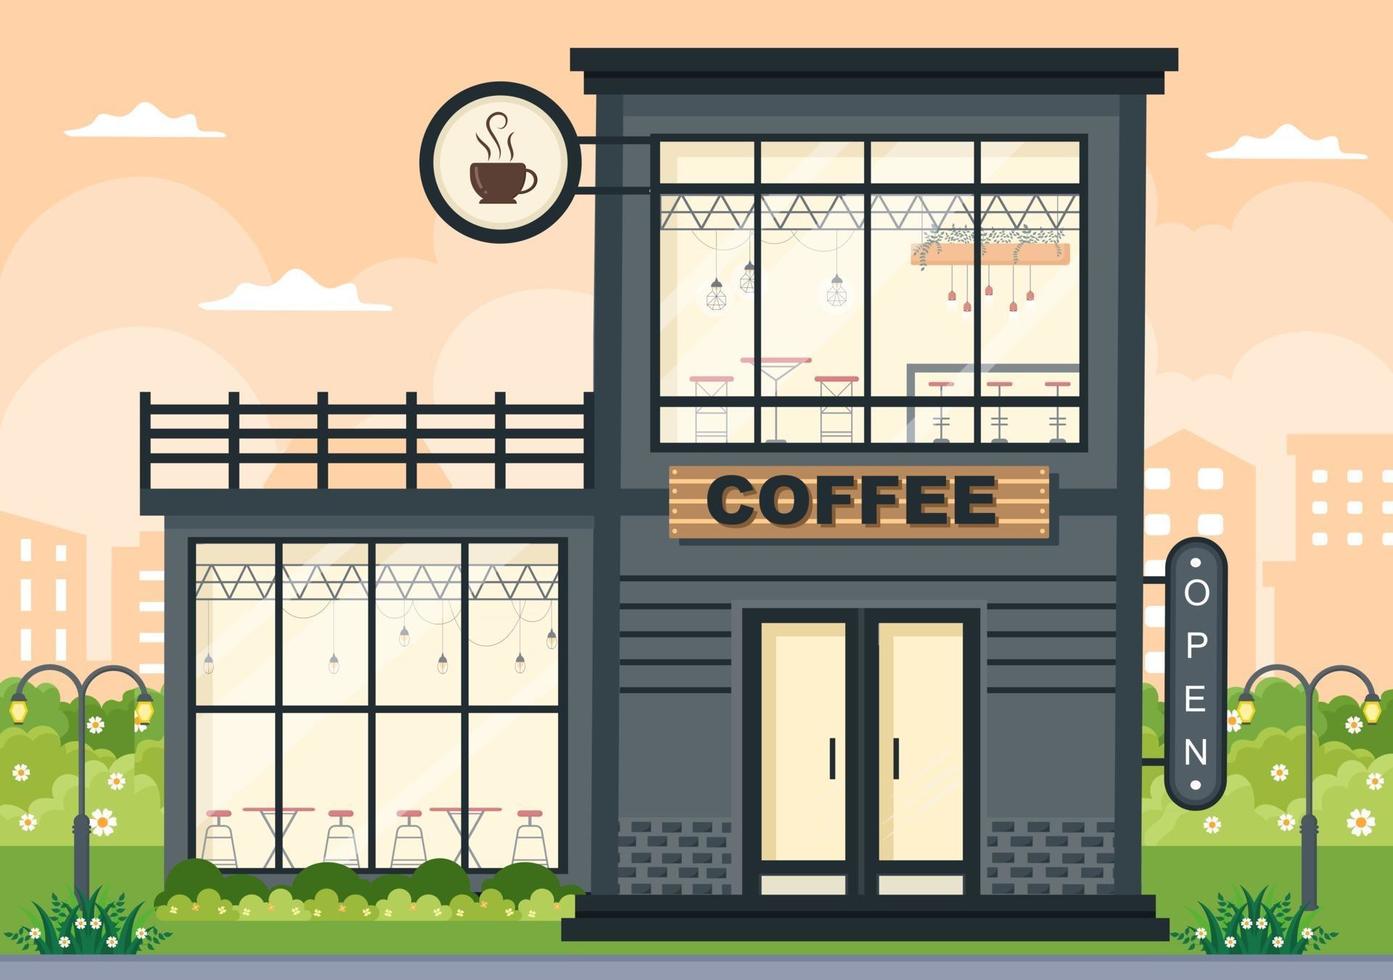 Coffee Shop Illustration With Open Board, Tree, And Building Store Exterior. Flat Design Concept vector